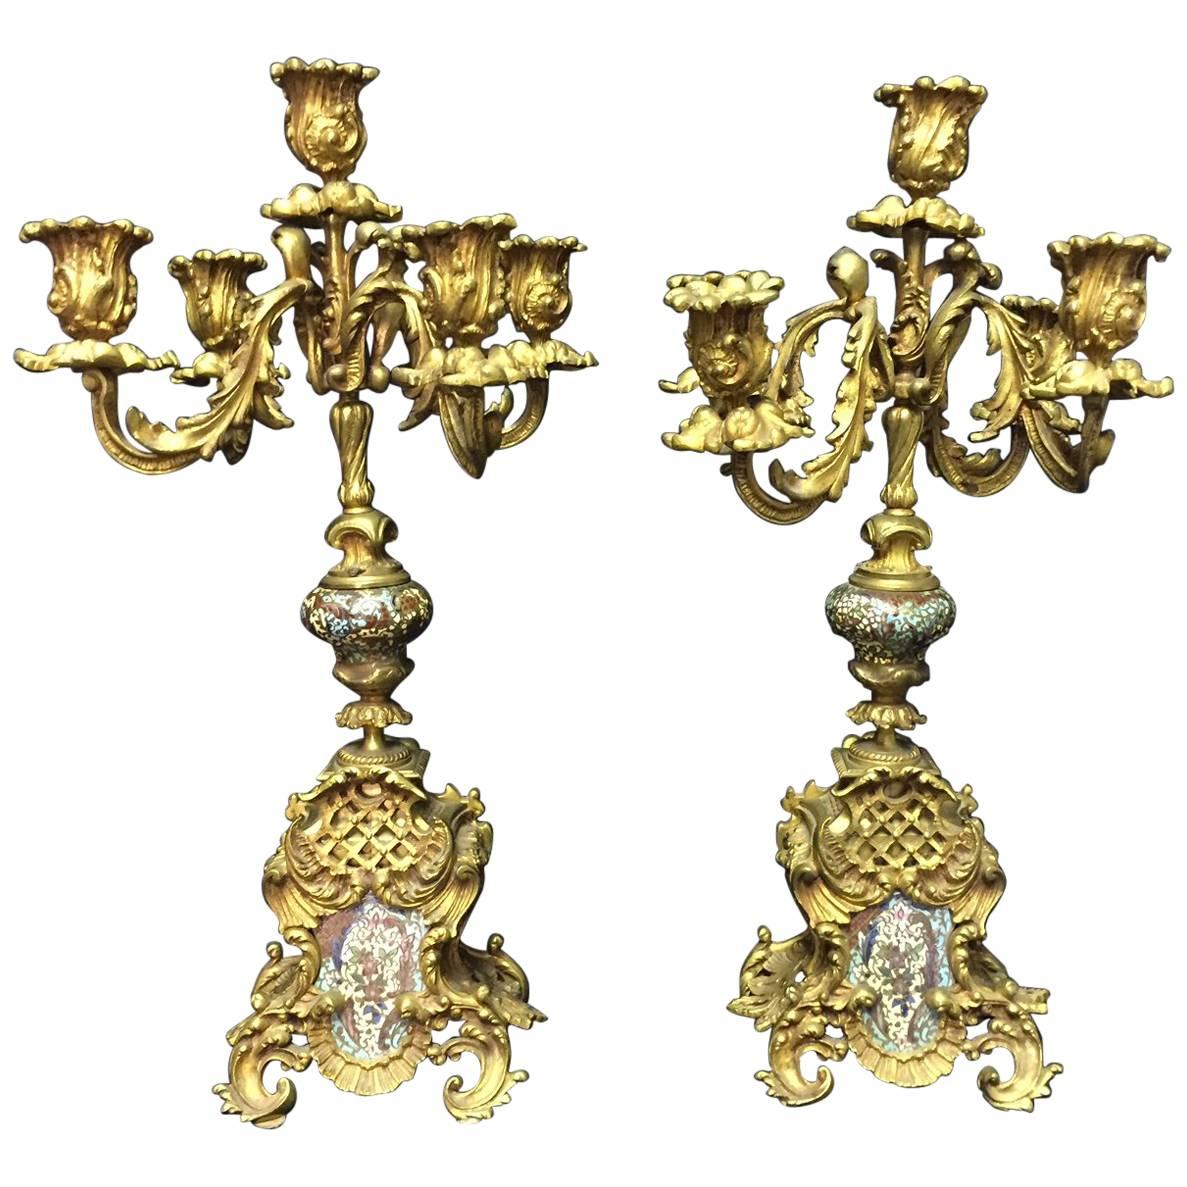 19th Century French Rococo Style Pair of Ormolu and Champleve Candelabra